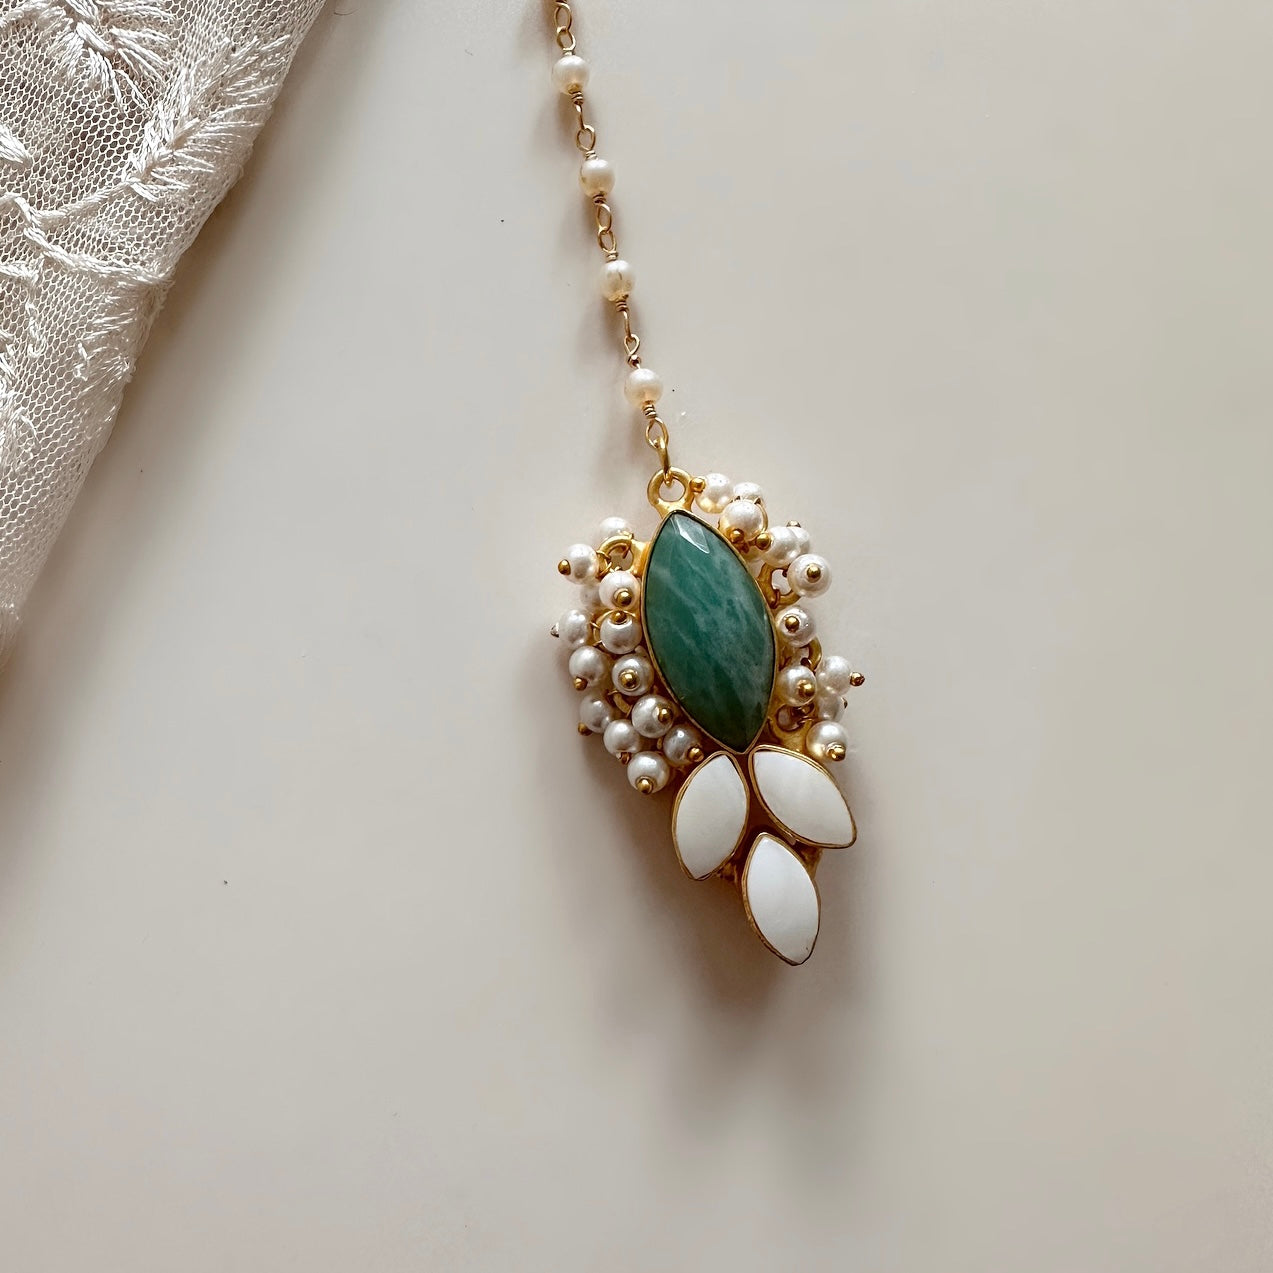 This dazzling Baroque Pearl Tikka & Earring Set provides a luxurious touch of sophistication with its gorgeous baroque pearls and beautiful jade hues. An exquisite addition to any outfit, this exquisite set is sure to elevate your look. Earring drop 7.5cm Tikka one size Pearl shapes may vary